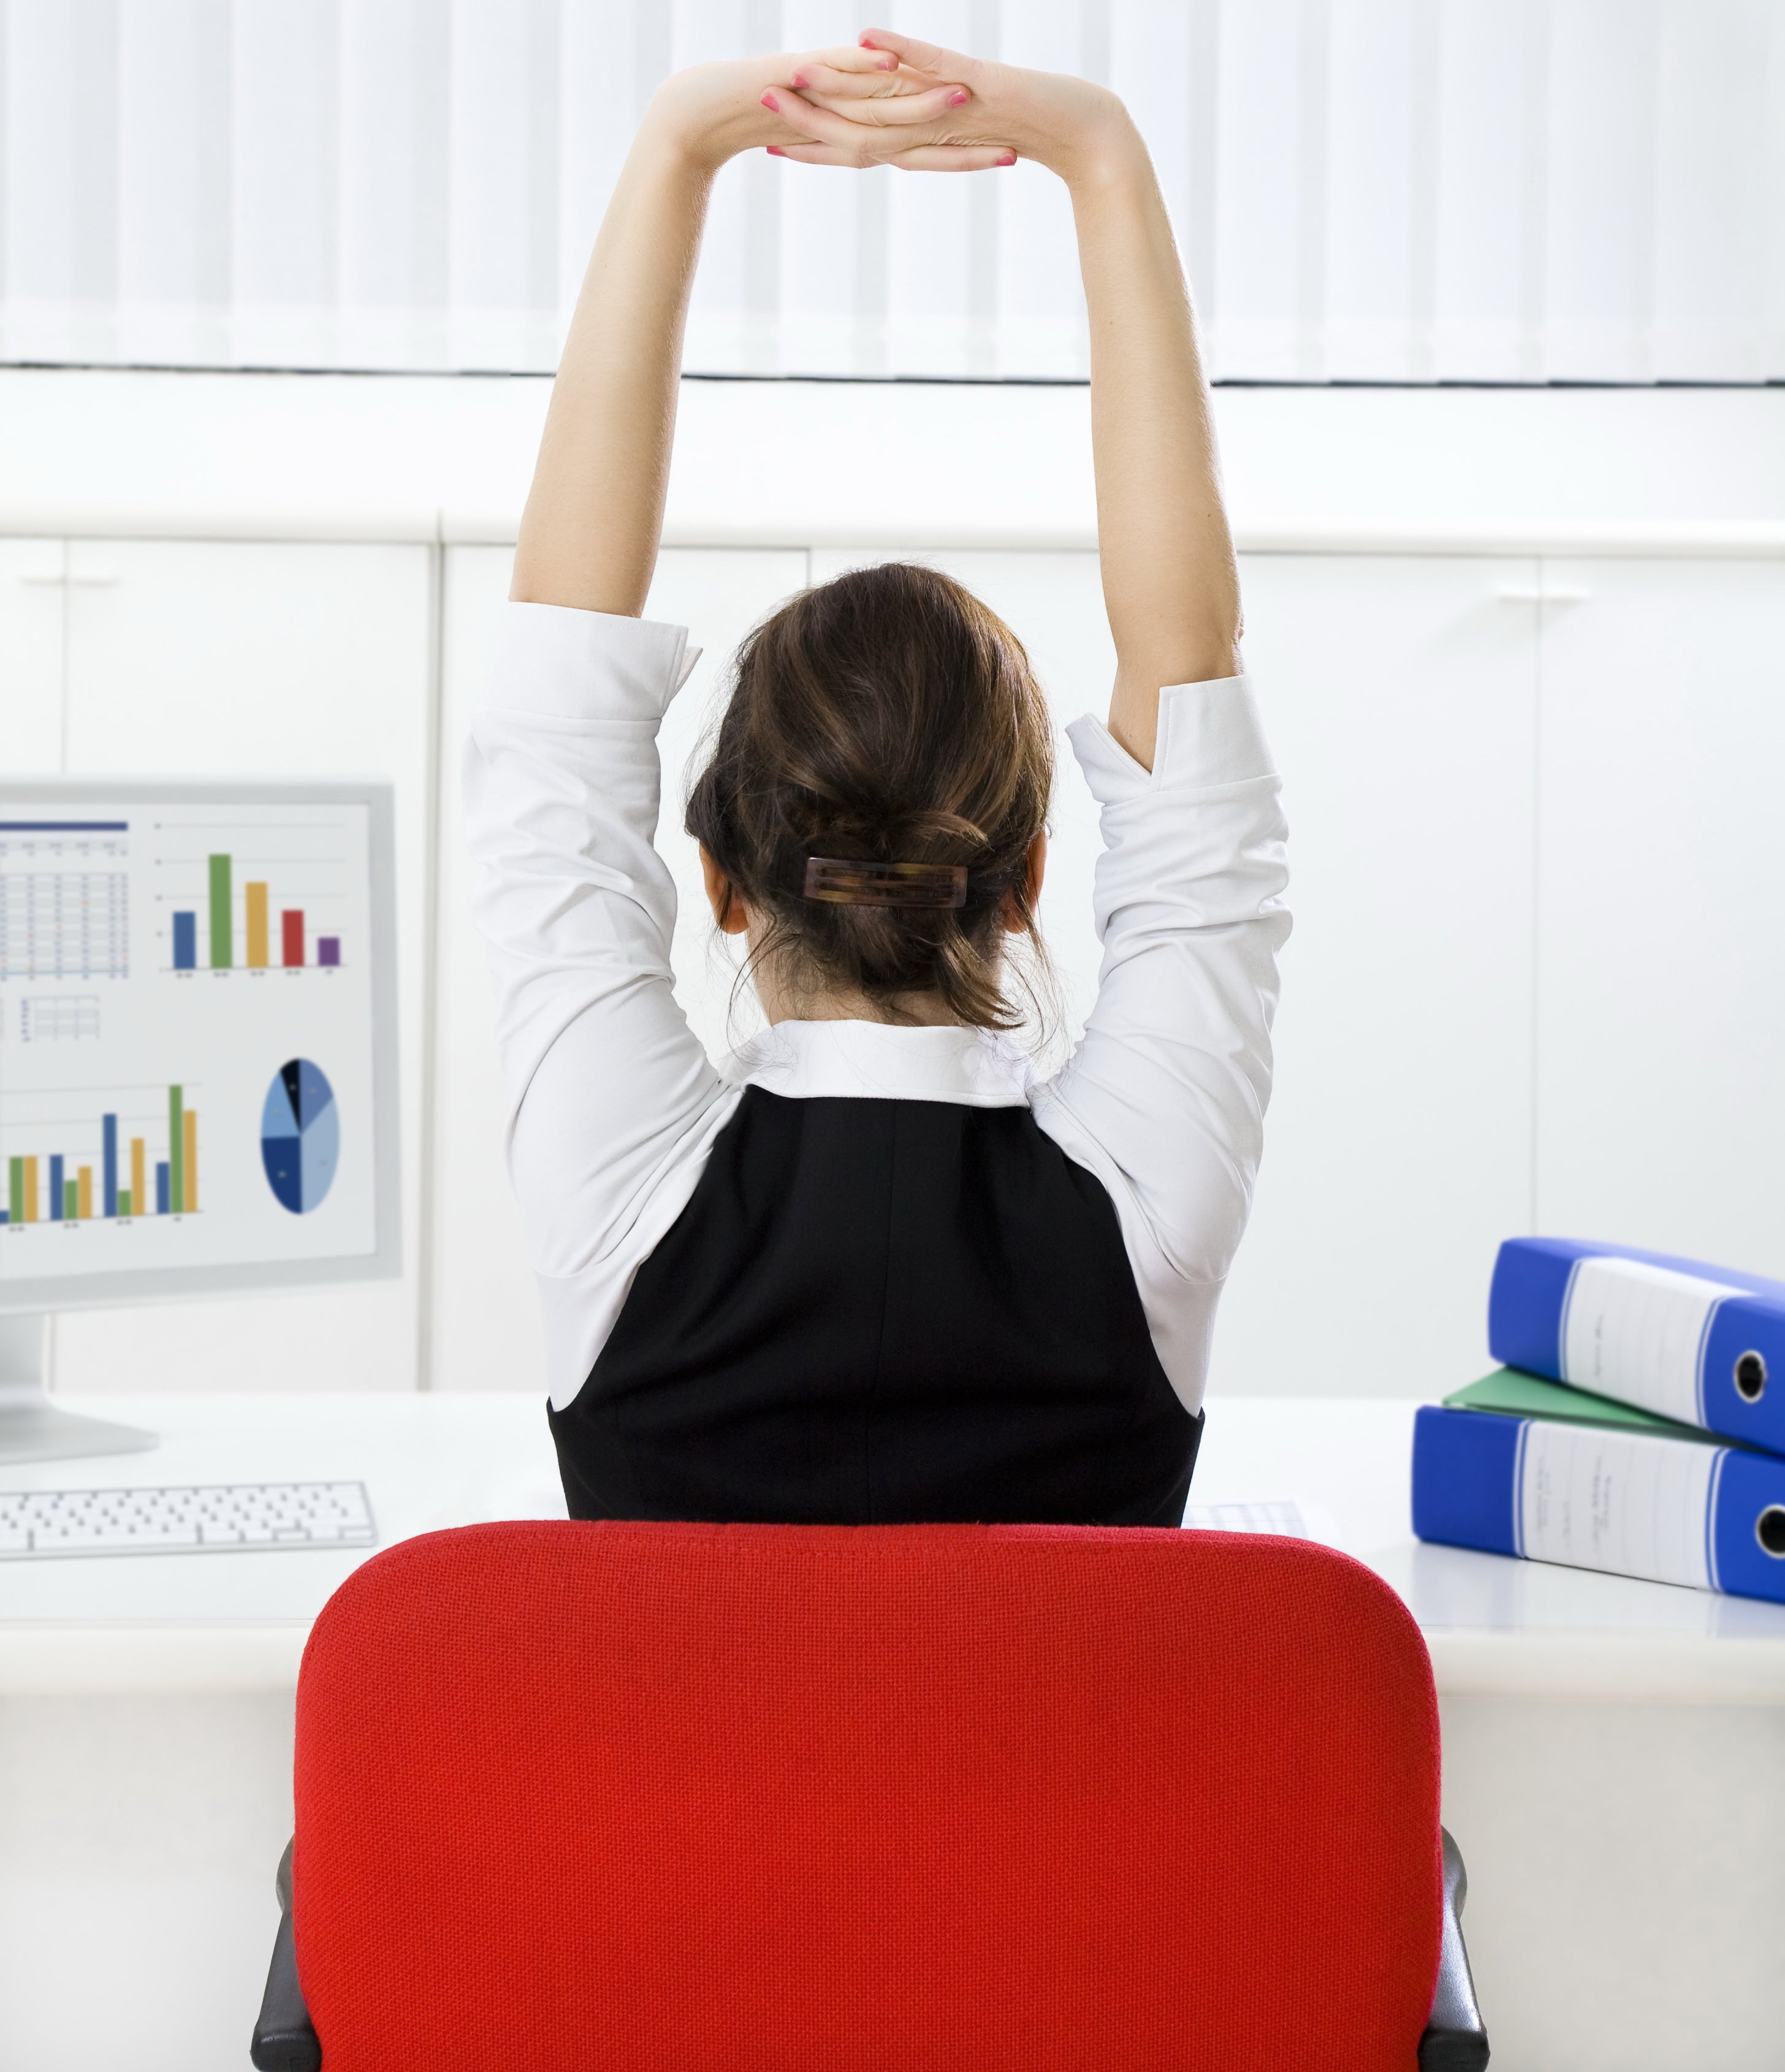 How to Stay Physically Active When Working From a Home Office